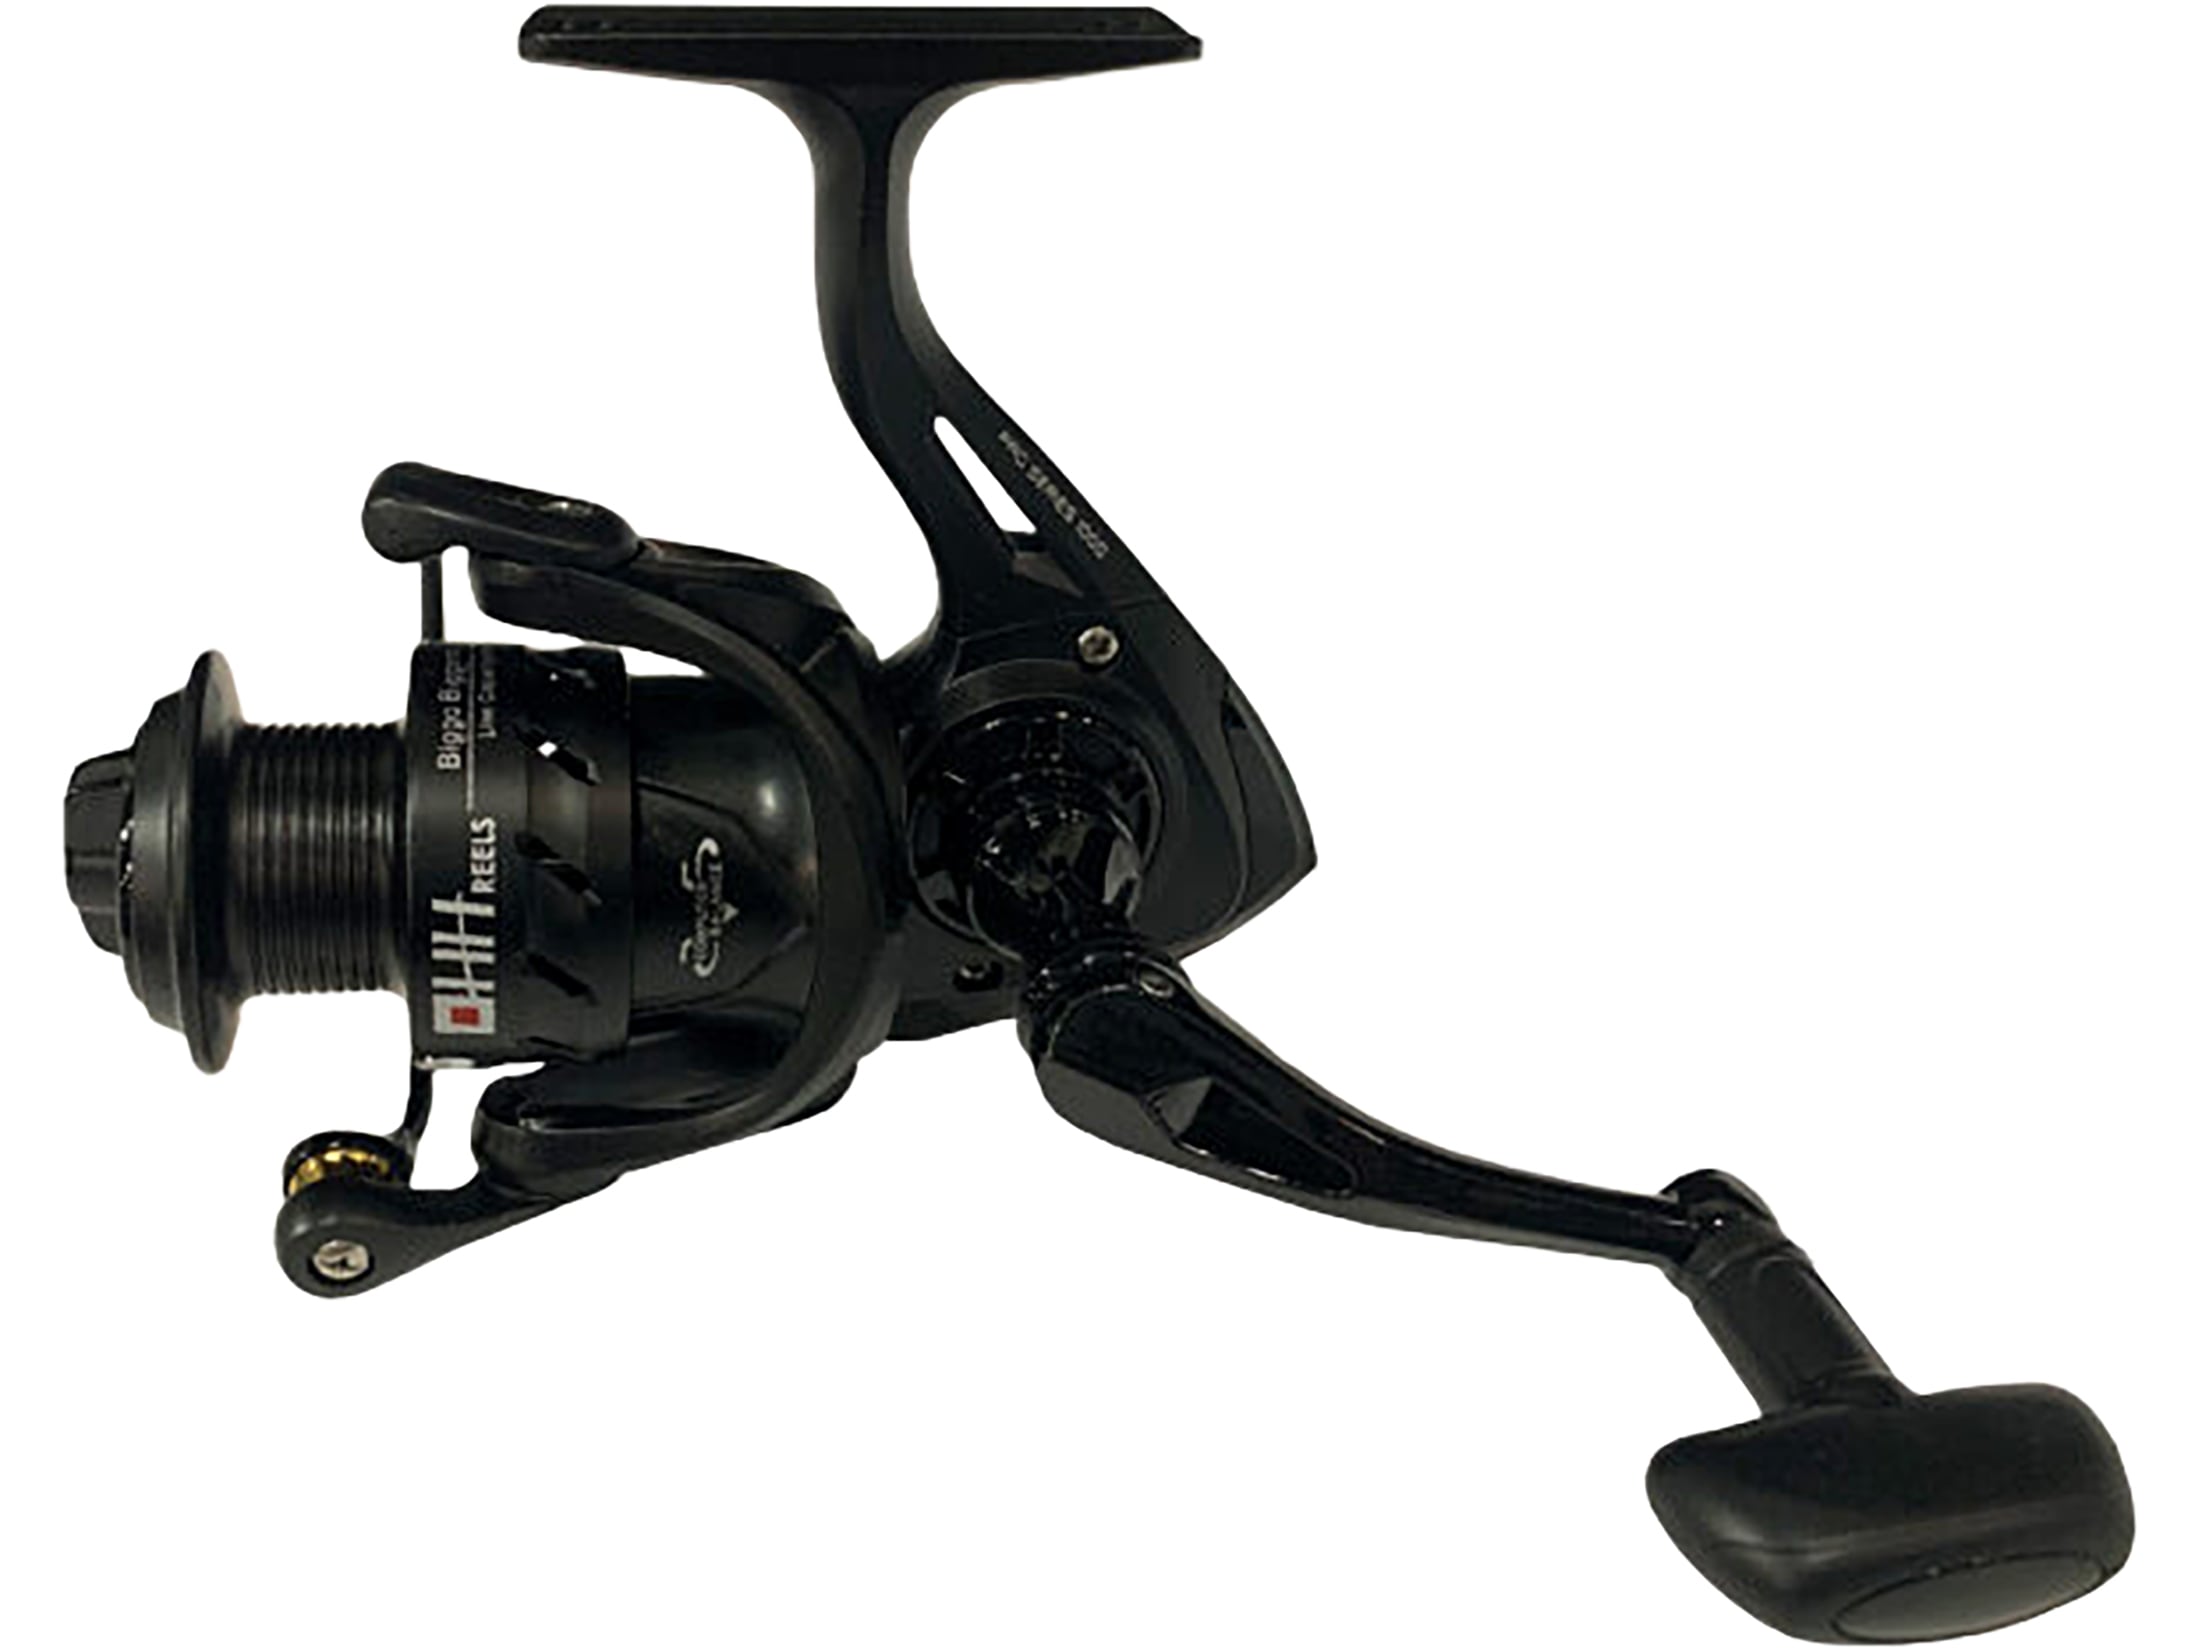 HH REELS SPINNG REEL KF1000 CRAPPIE POLE, ROD 